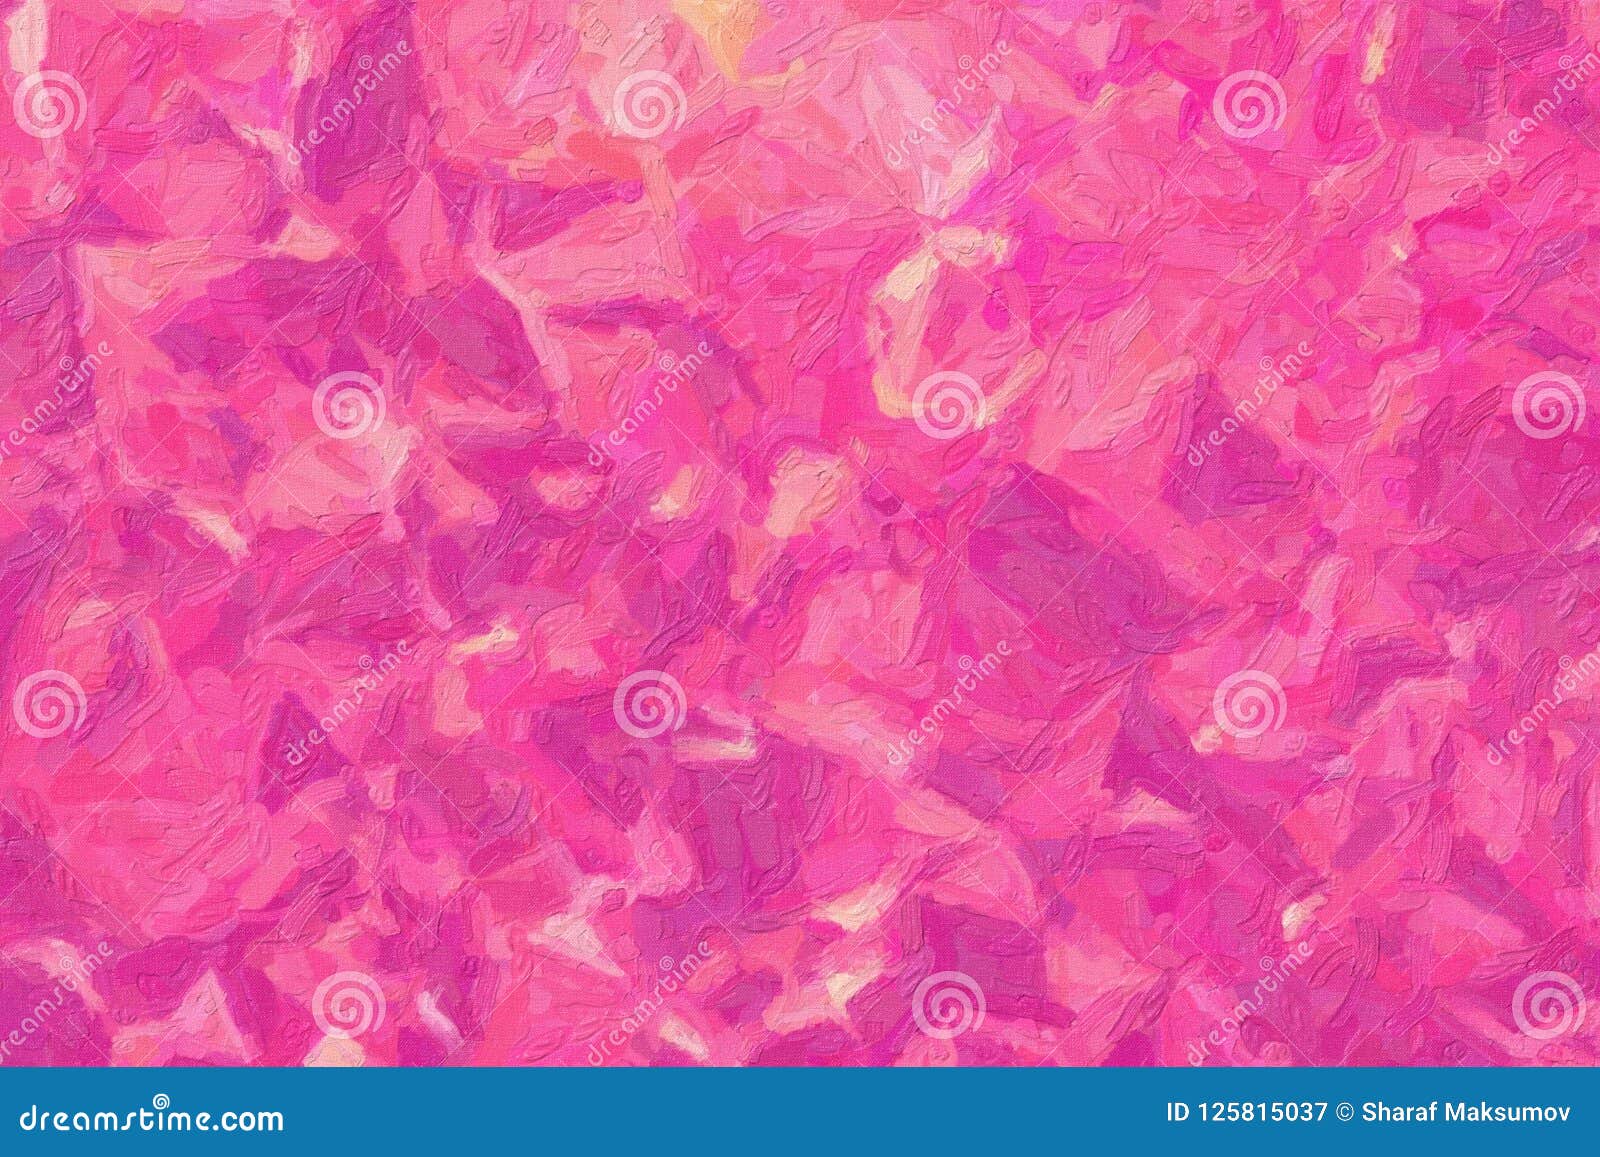 Nice Abstract Illustration of Red, Purple and Magenta Impasto with ...